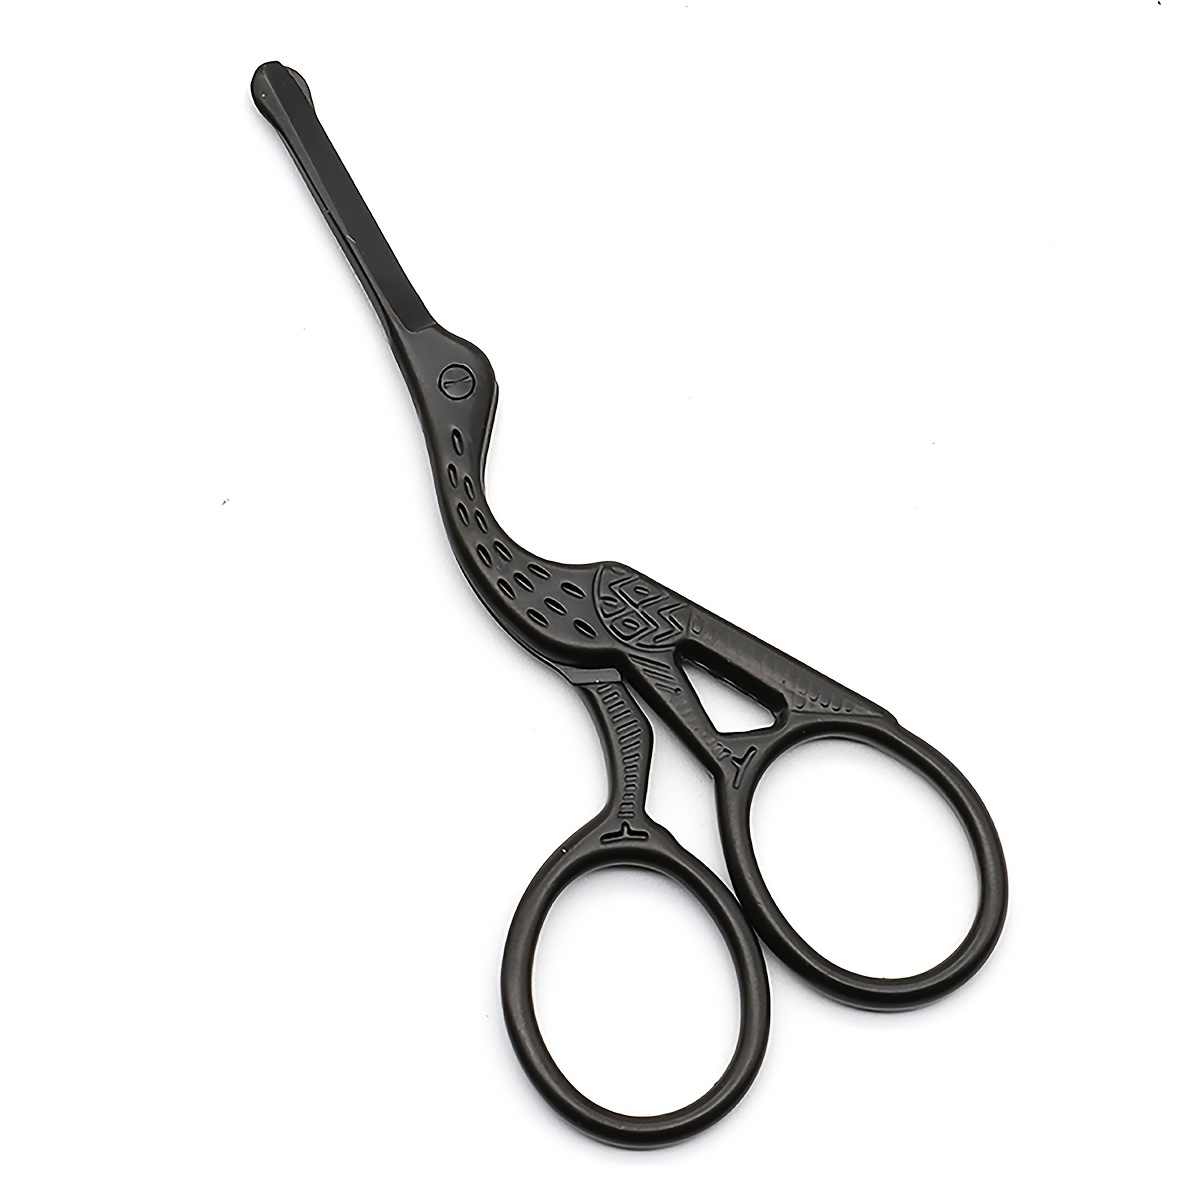 

1pc Crane Type Round Tip Eyebrow Trimming Scissors, Suitable For Eyebrow, Nose Hair, Beard, Ear Hair All Kinds Of Hair Trimming, Professional Unisex Makeup Care Scissors Father's Day Gift